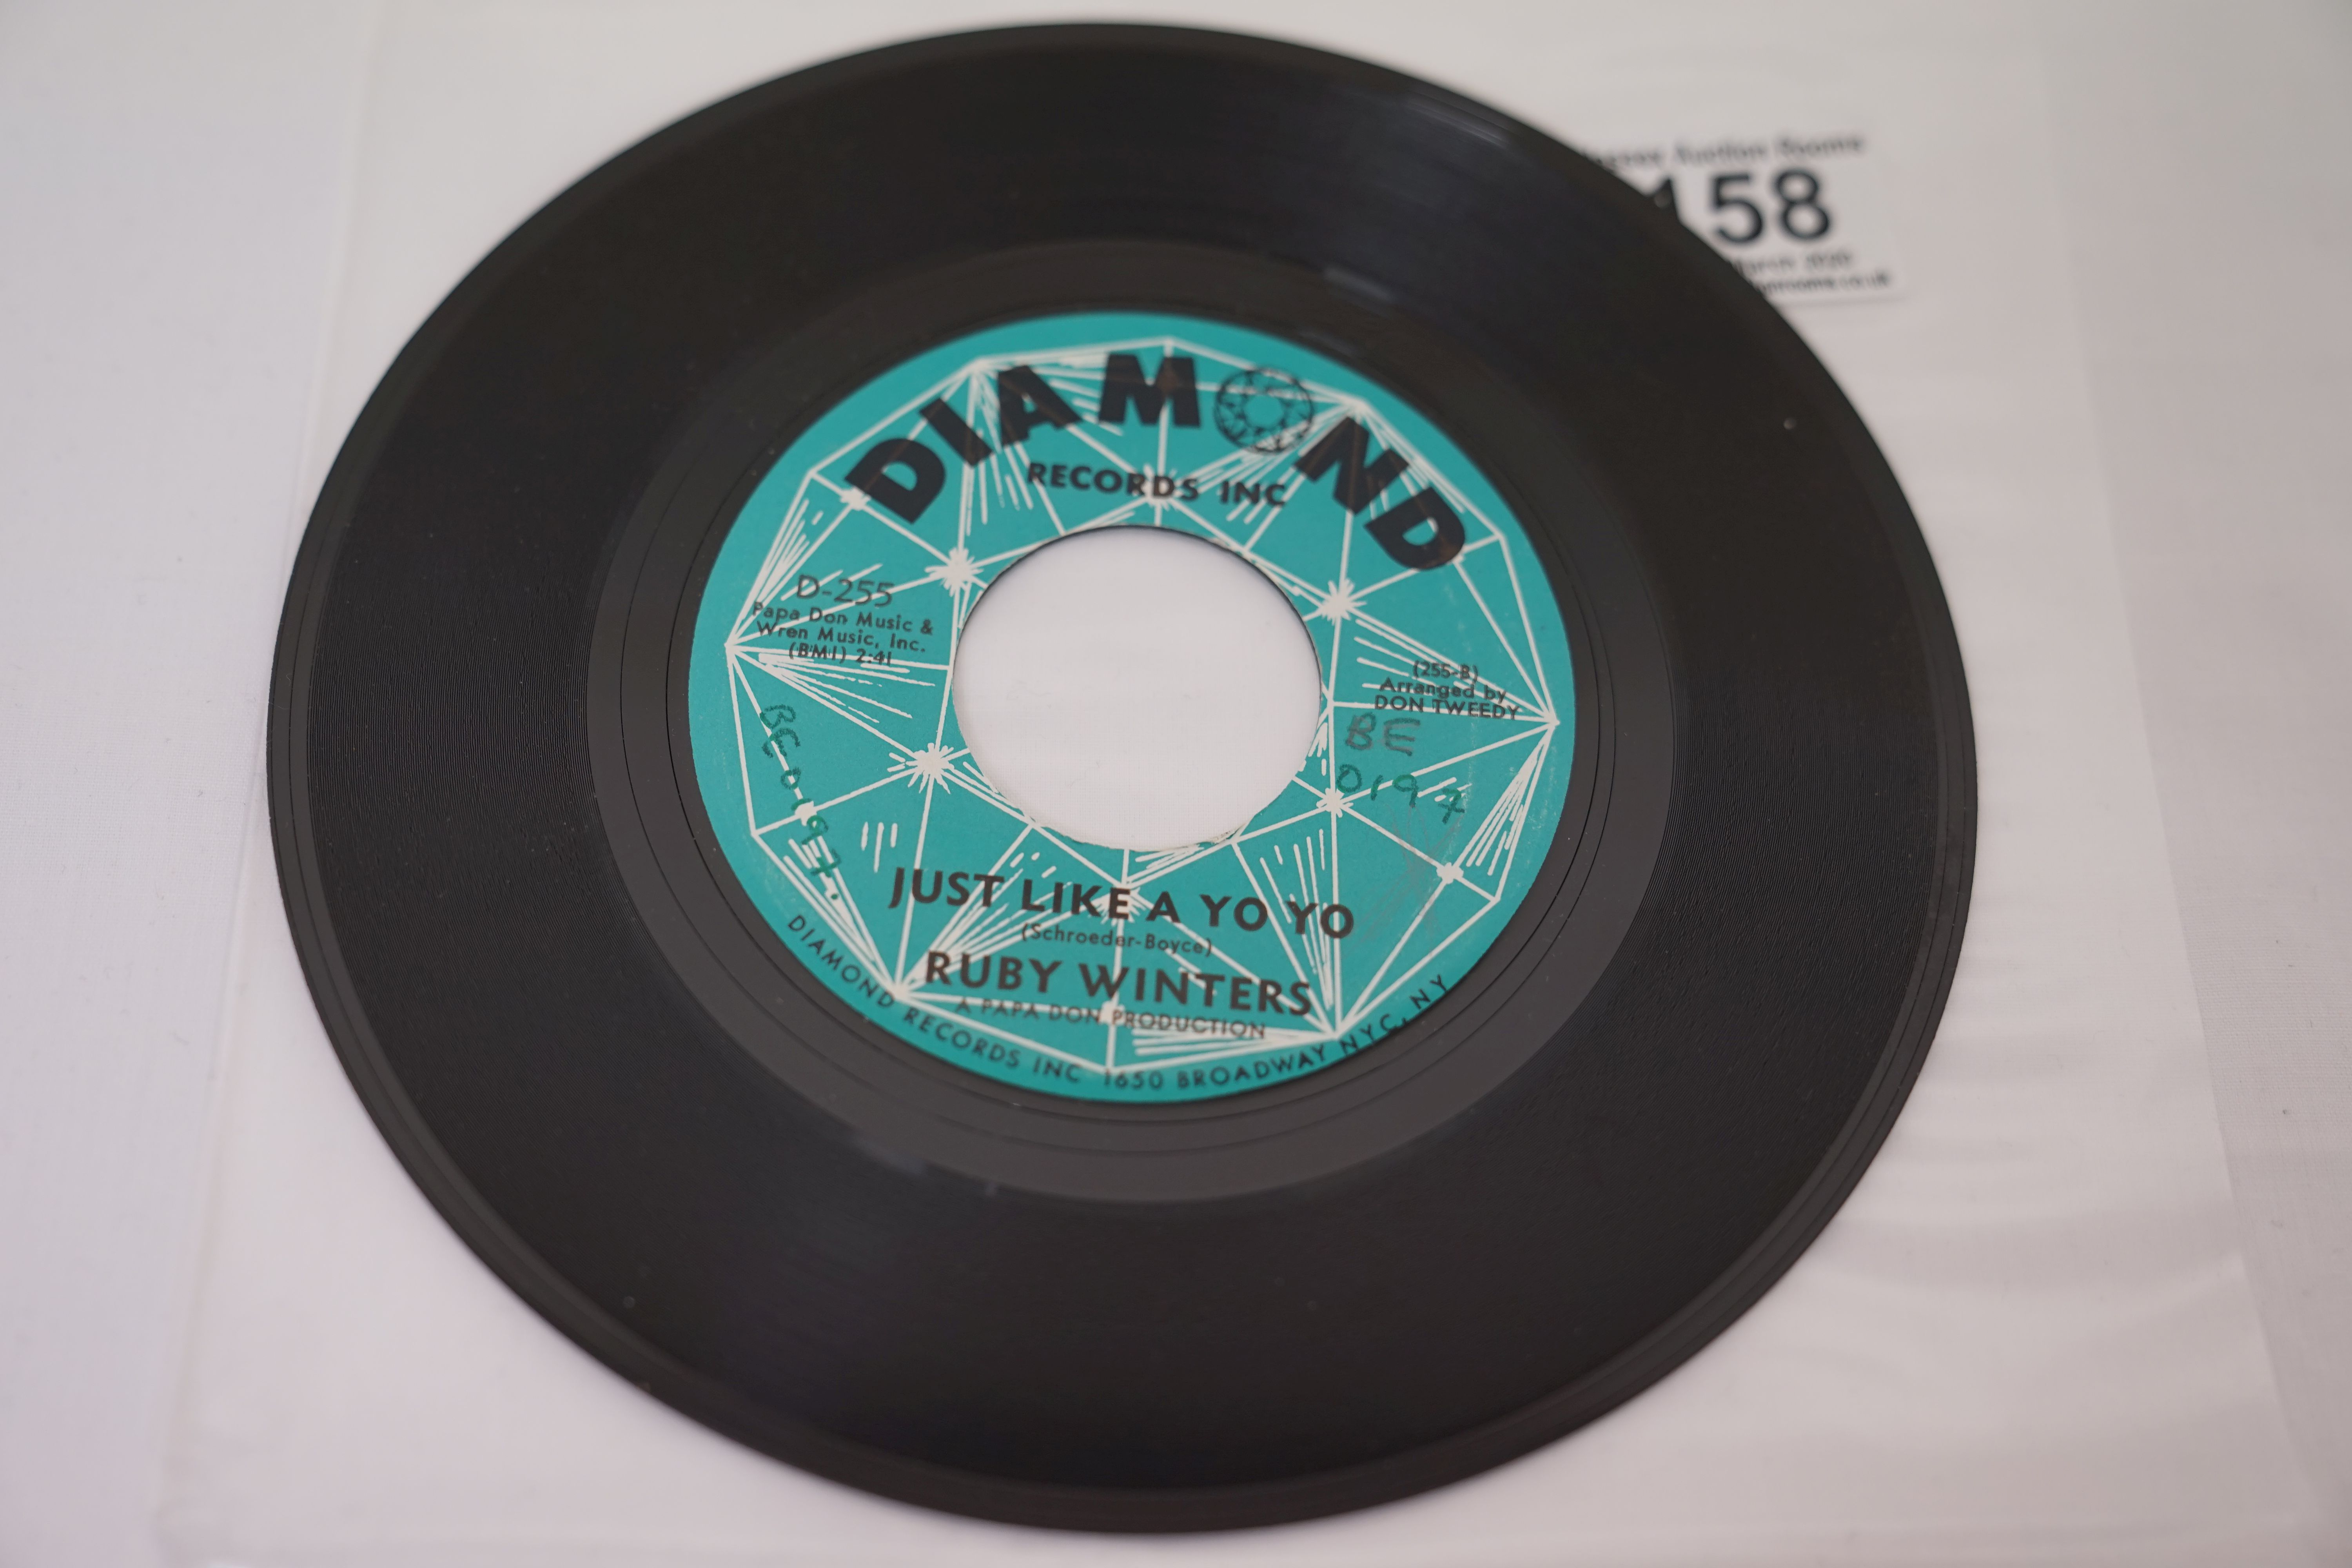 Vinyl - 5 rare US Northern Soul / R&B original US 1st pressing Stock singles on smaller labels. Ruby - Image 7 of 21